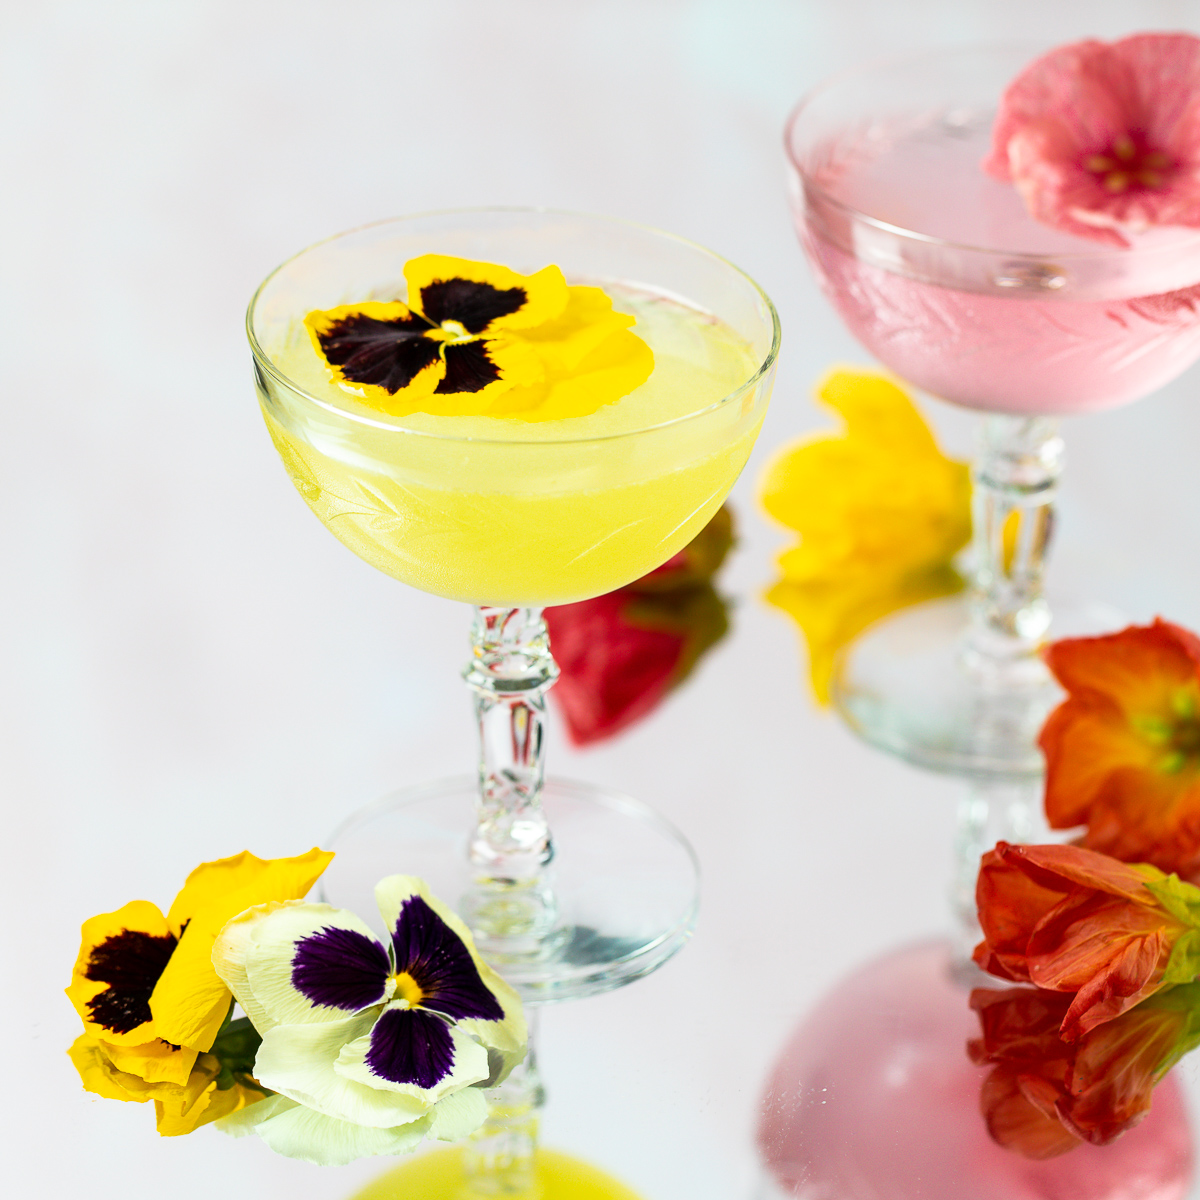 Bright yellow cocktail garnished with a pansy flower.